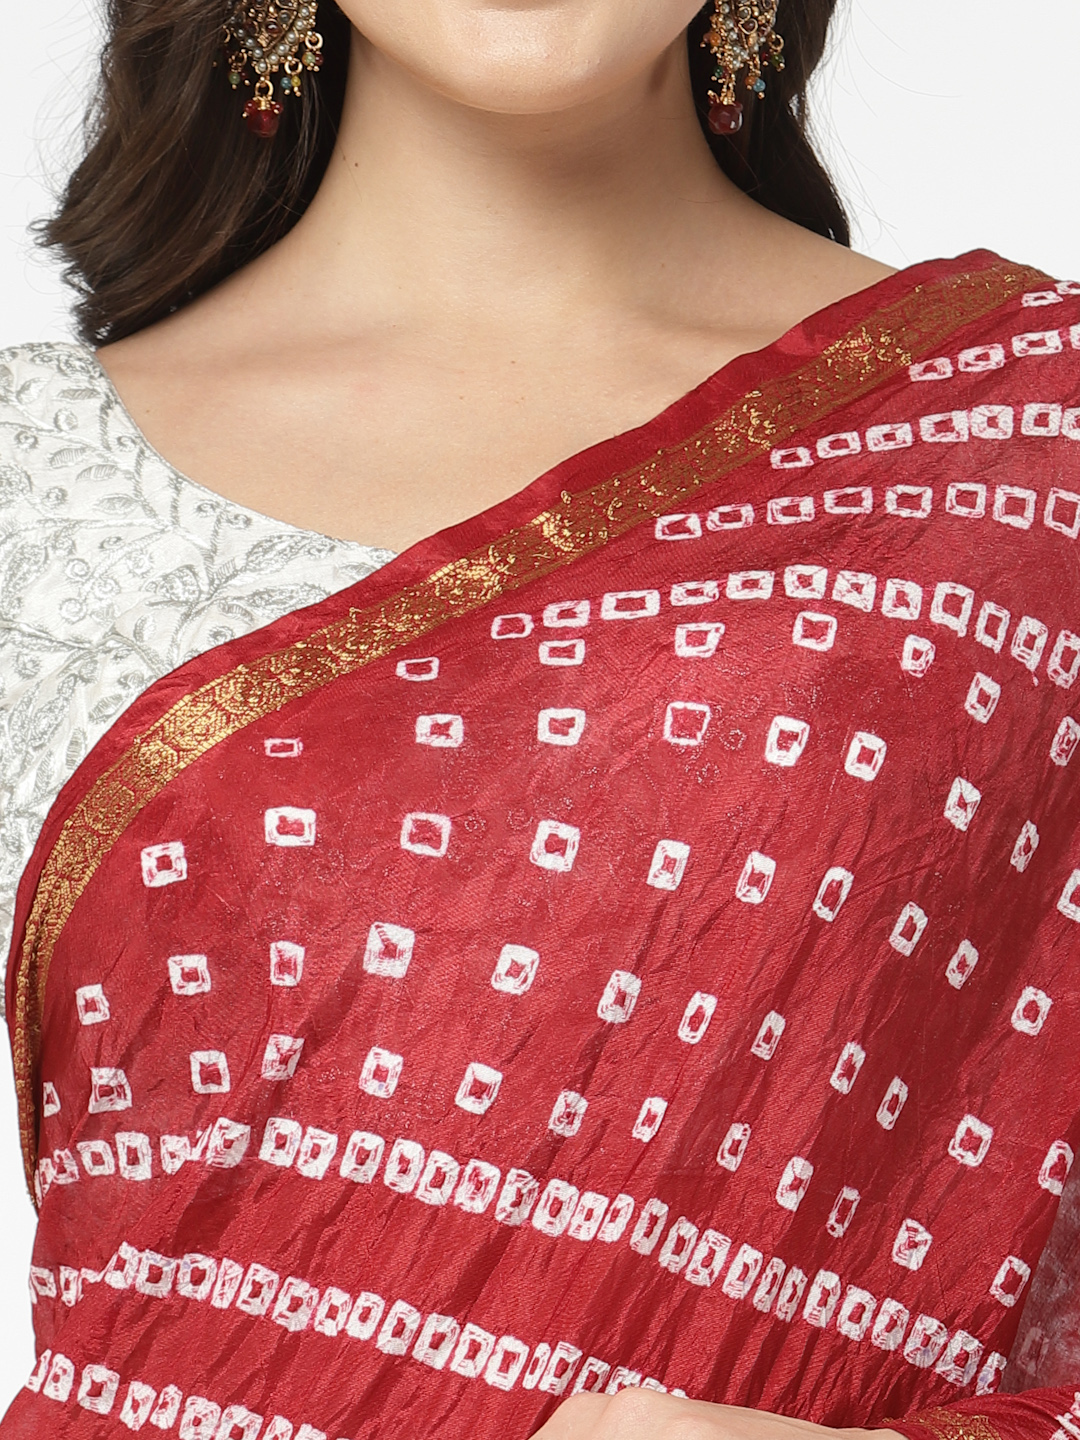 Silk Bandhani and Zari Weaving Saree with Unstitched Blouse - Maroon And White